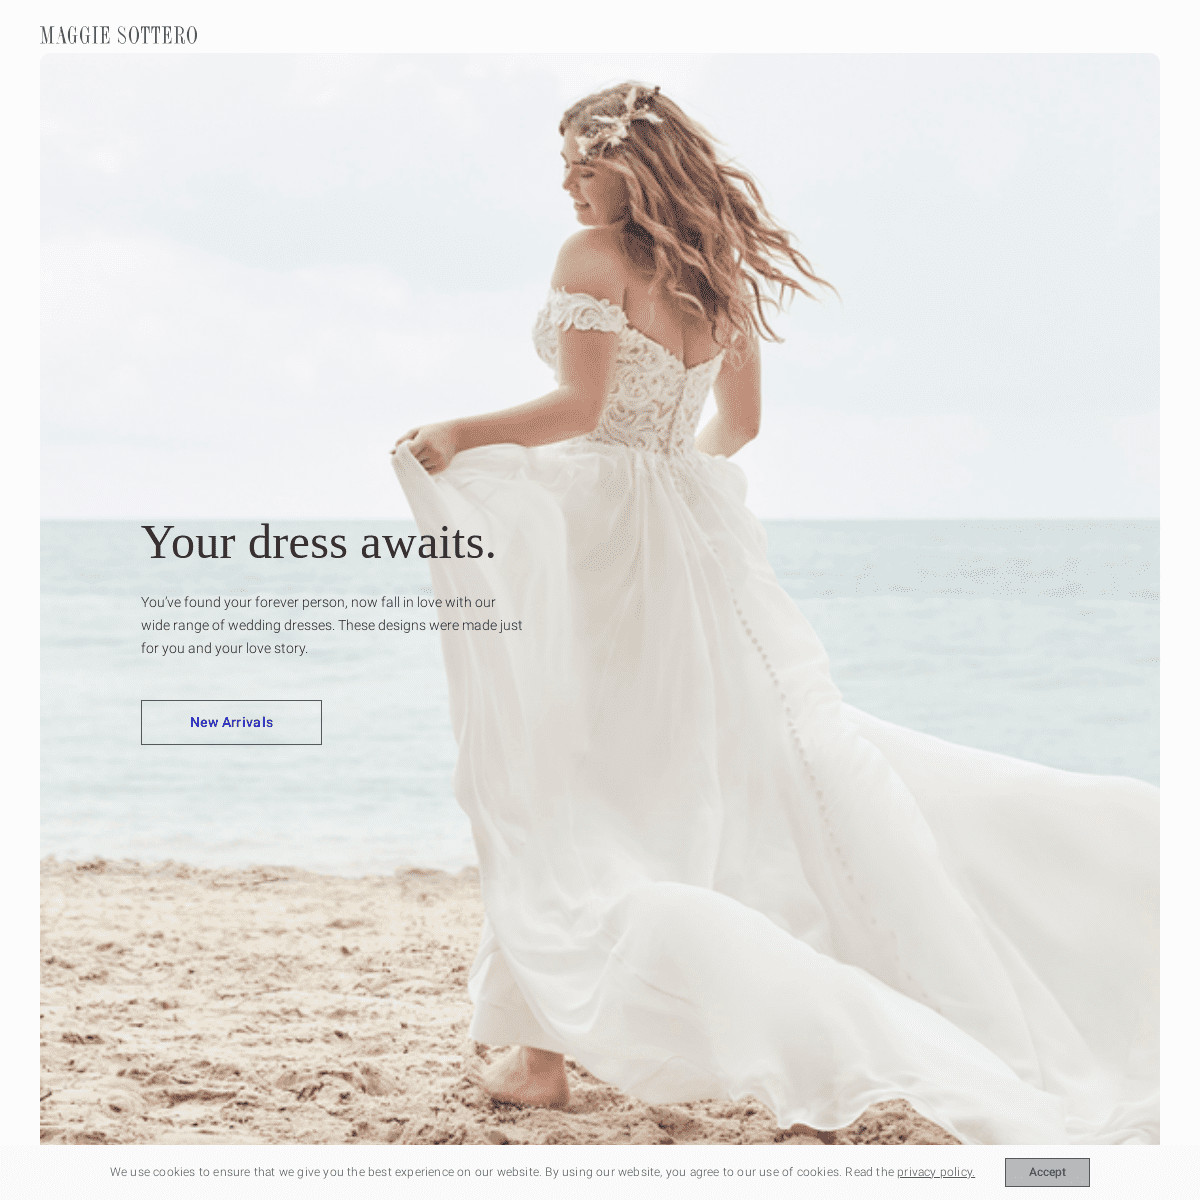 A complete backup of https://maggiesottero.com